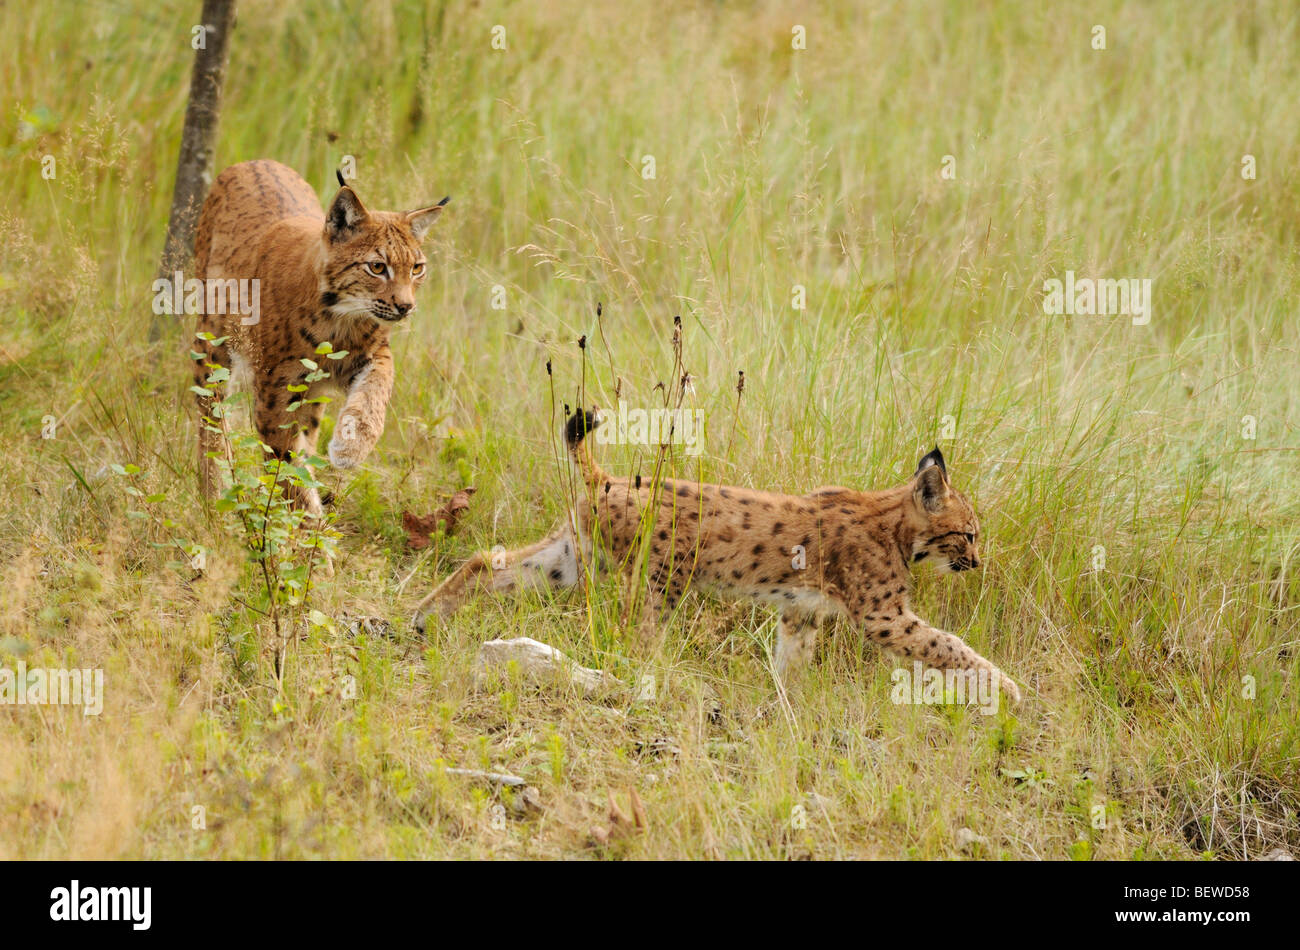 Mother animal and young Lynx (Lynx lynx) streaking through long grass, Bavarian Forest, Germany Stock Photo